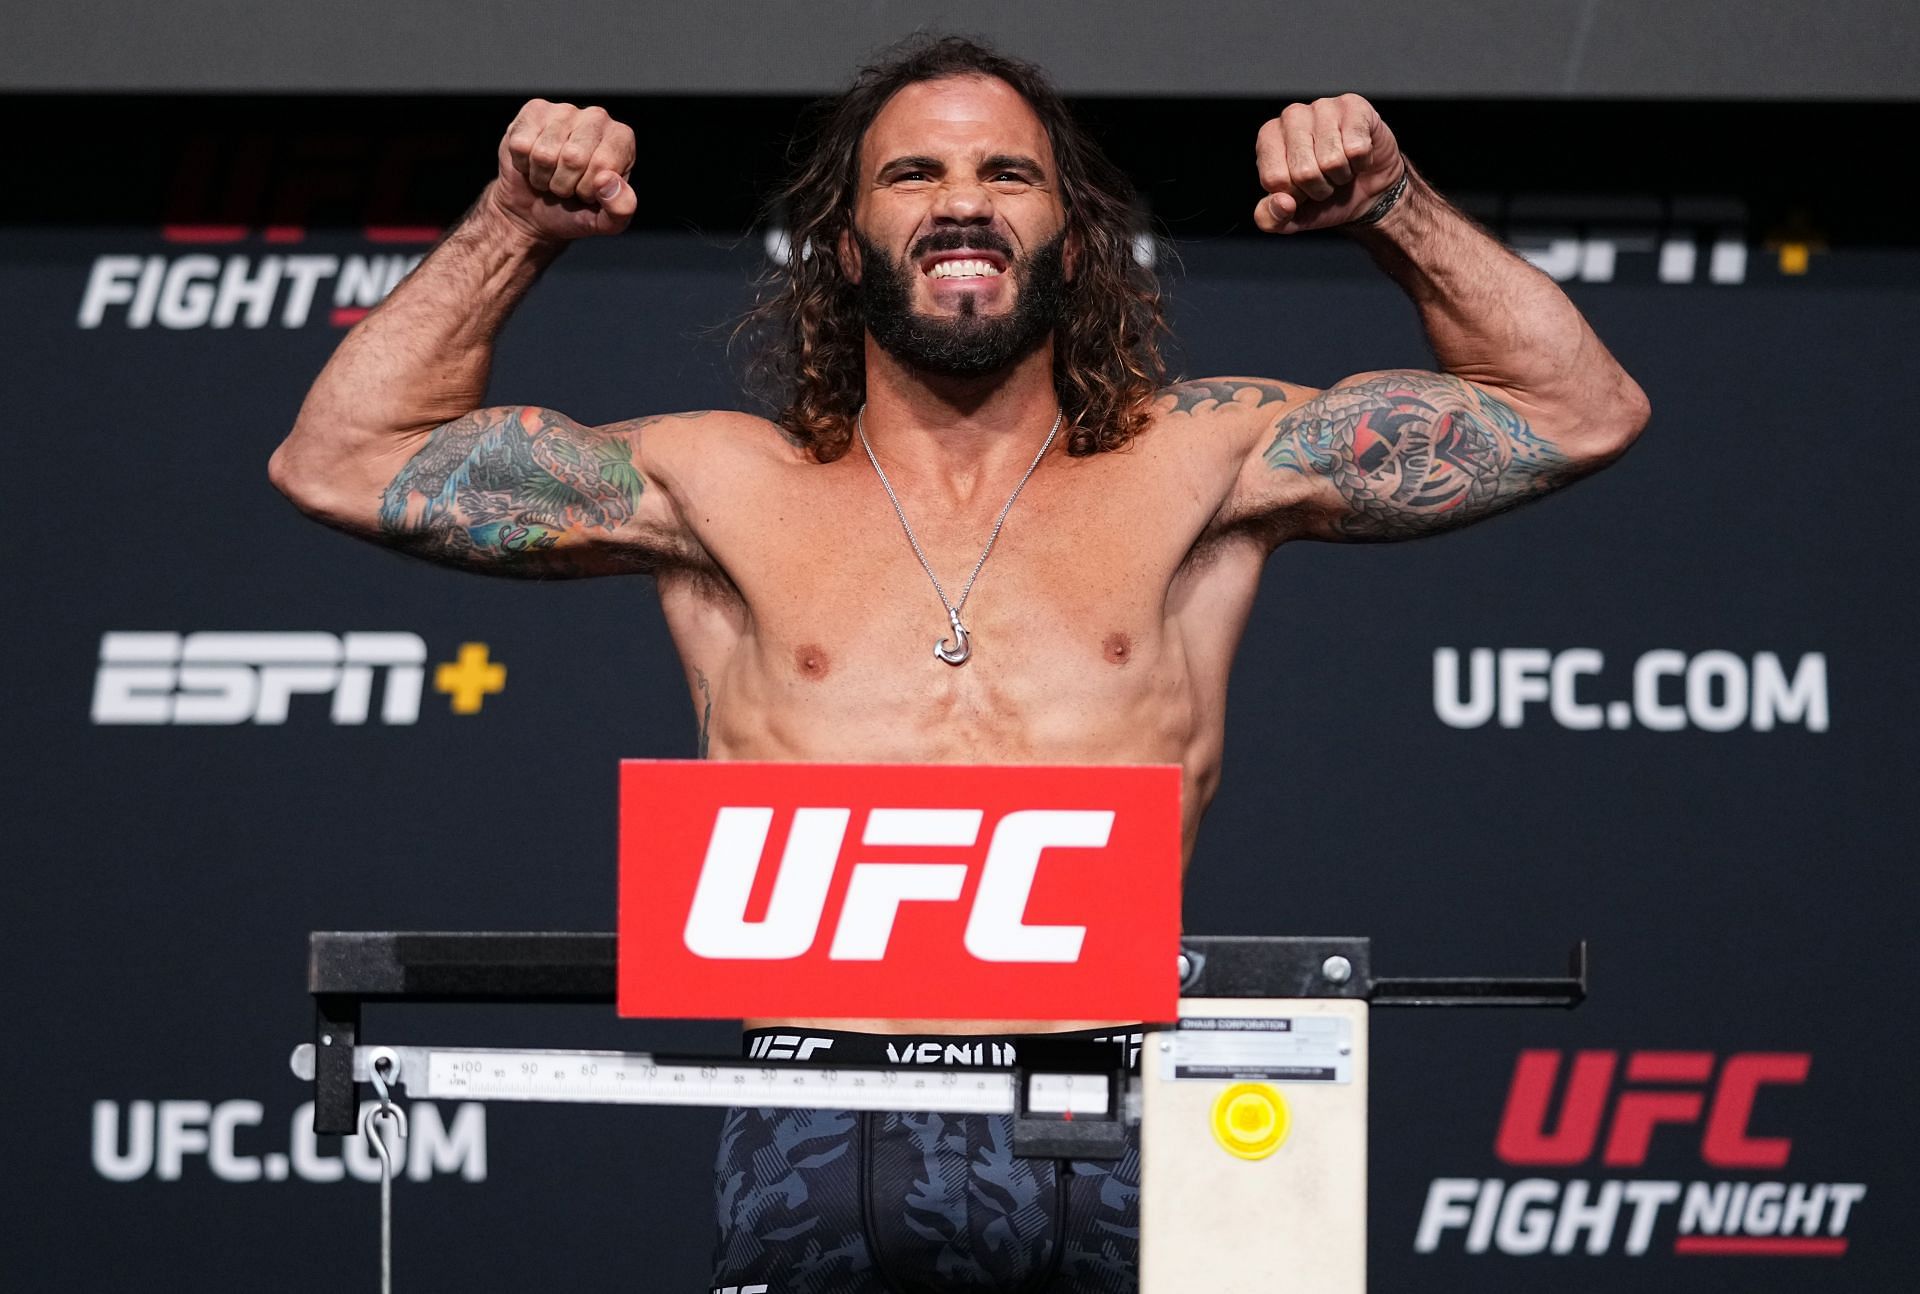 UFC Fight Night: Cannonier v Gastelum Weigh-in: Clay Guida on the scales (Image courtesy of Getty)